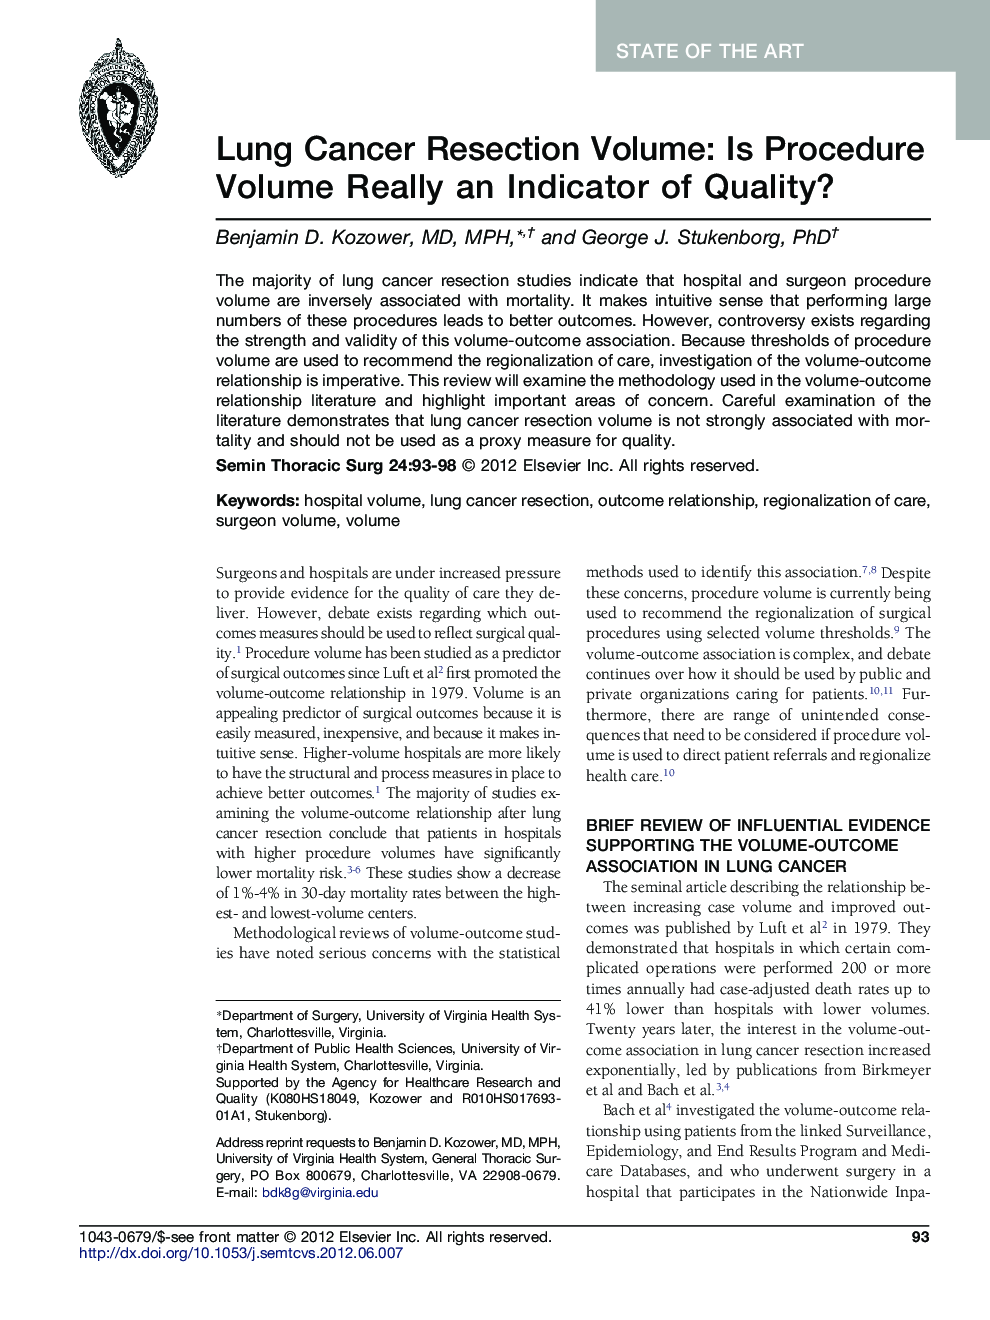 Lung Cancer Resection Volume: Is Procedure Volume Really an Indicator of Quality? 